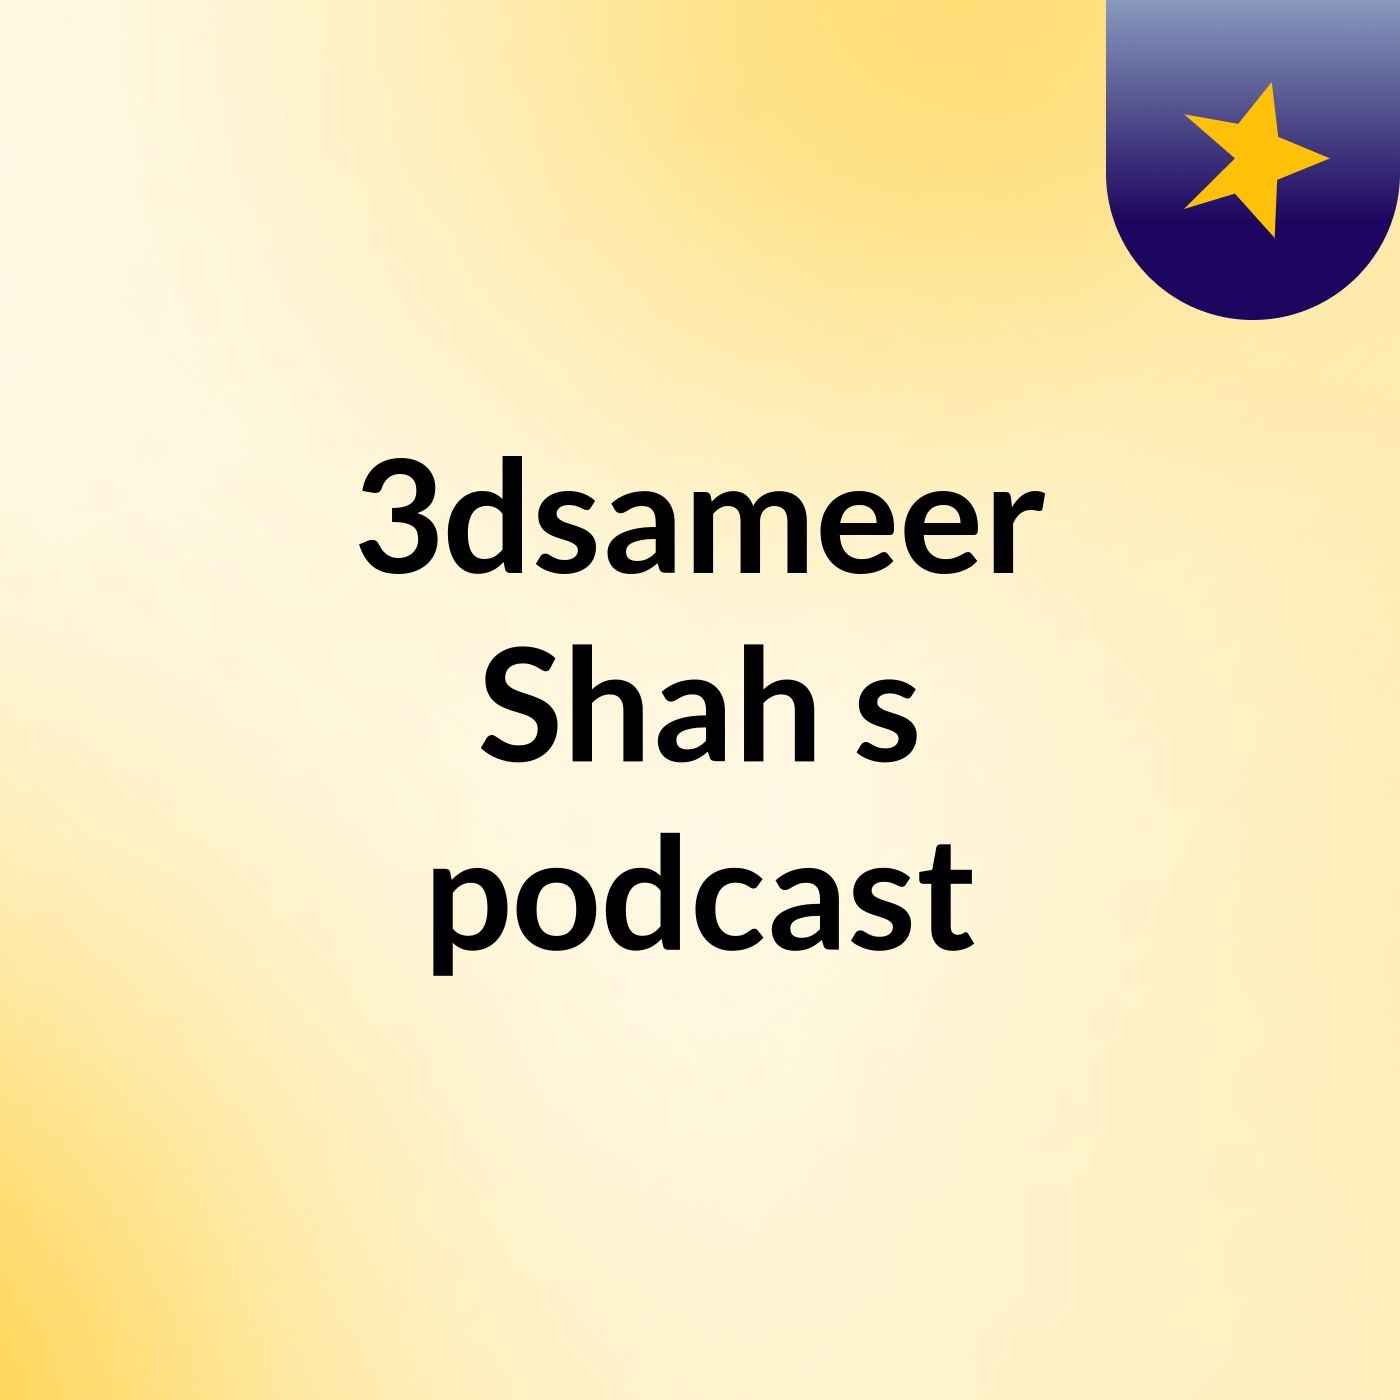 3dsameer Shah's podcast